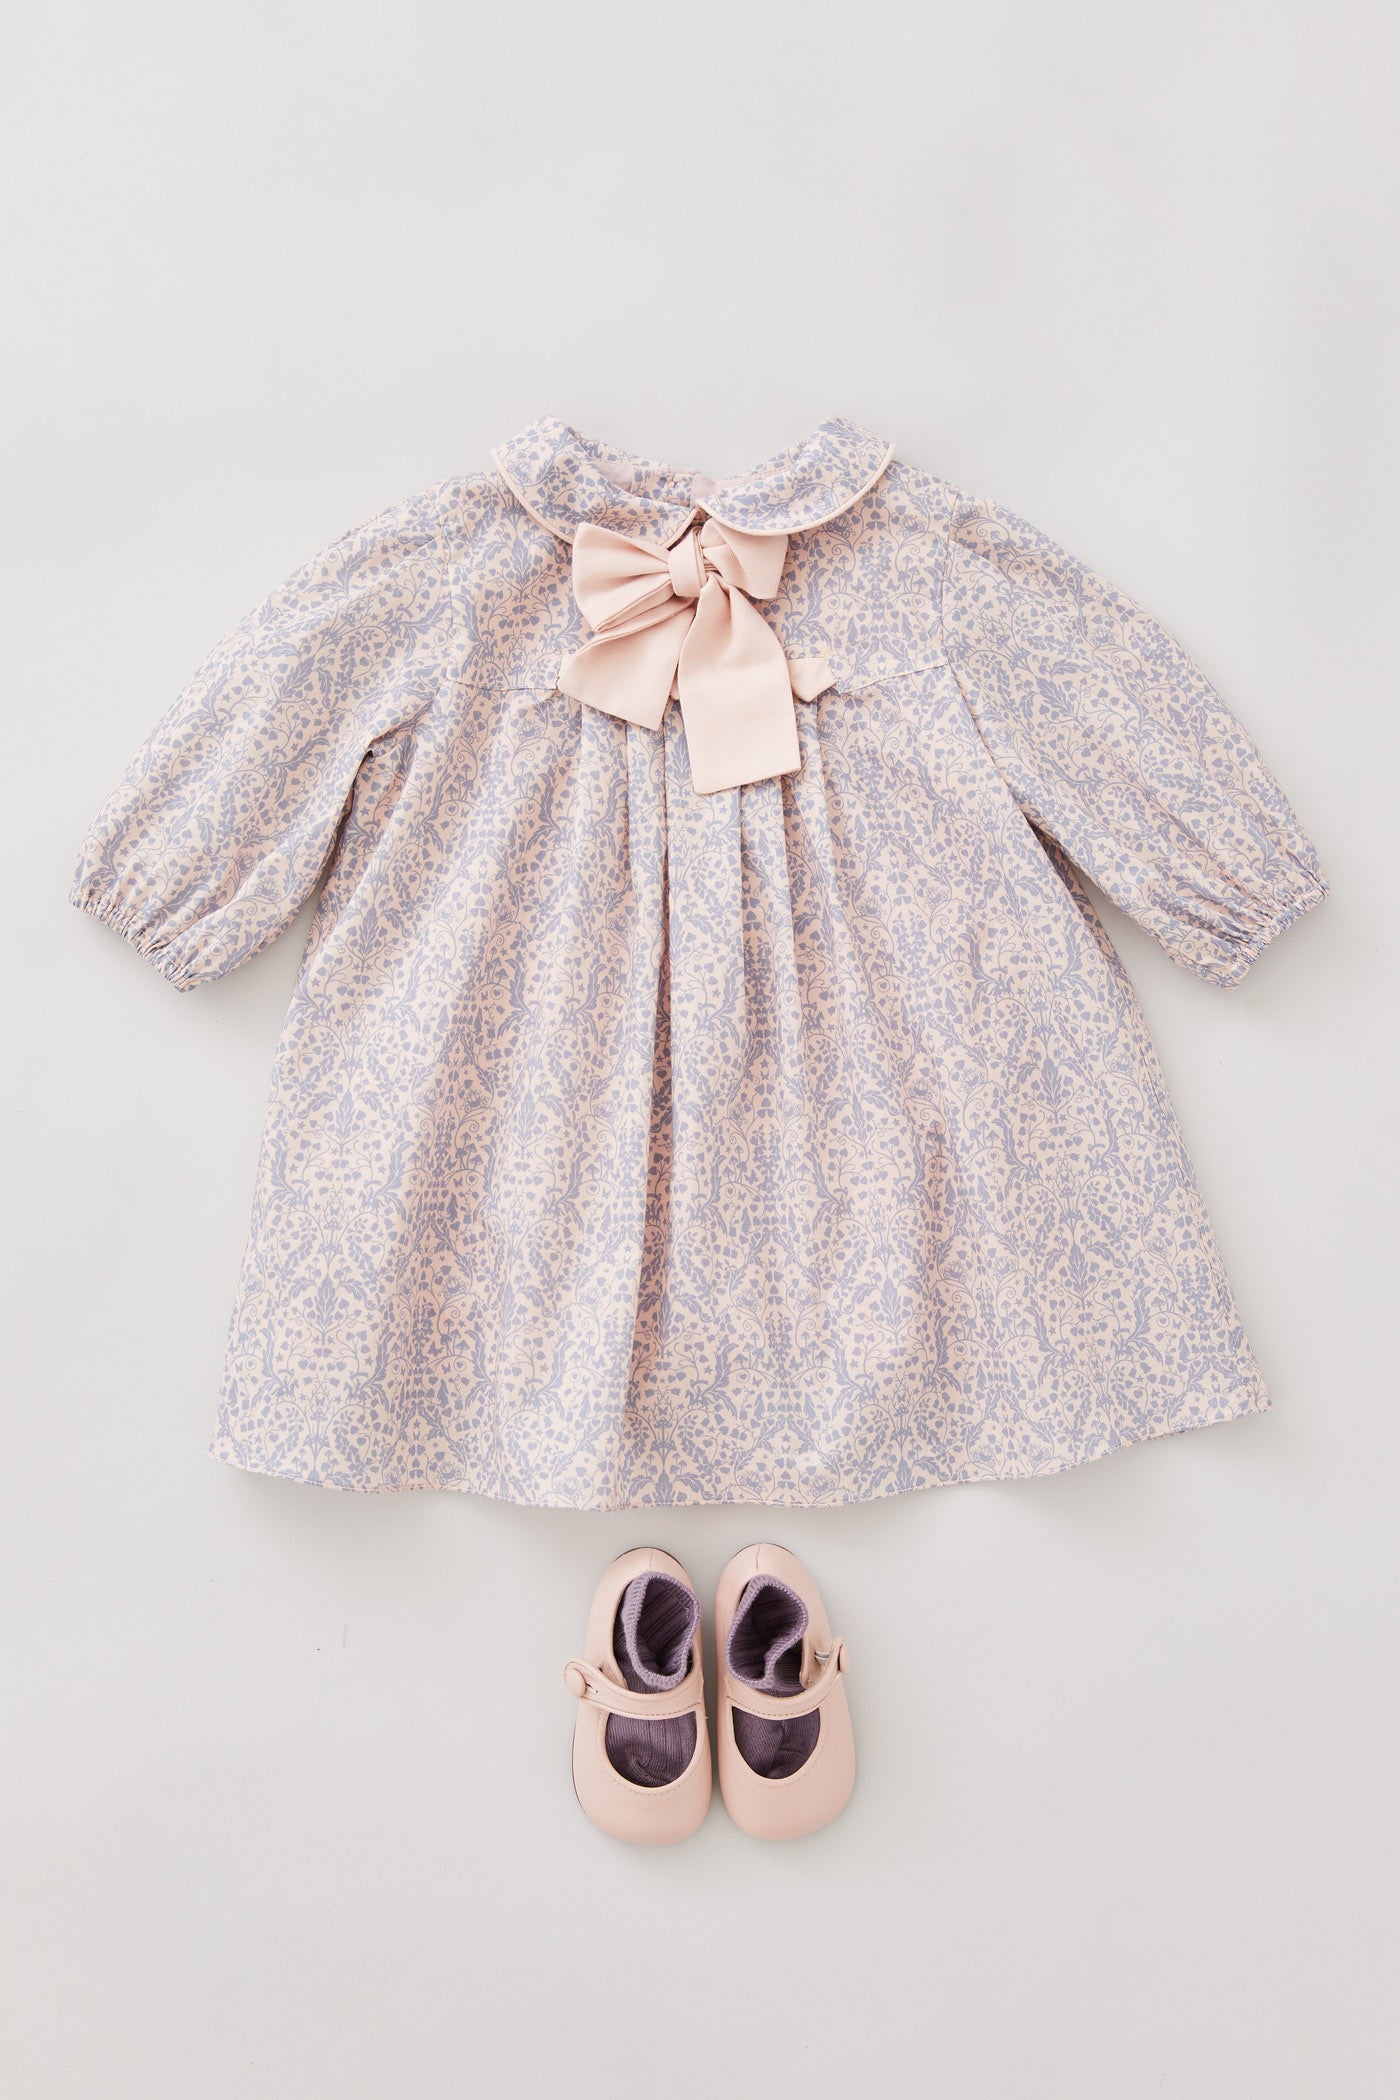 Baby Zigzag Dress in Pink and Lavender Fairy Liberty Print - Designed by Ingrid Lewis - Strawberries & Cream